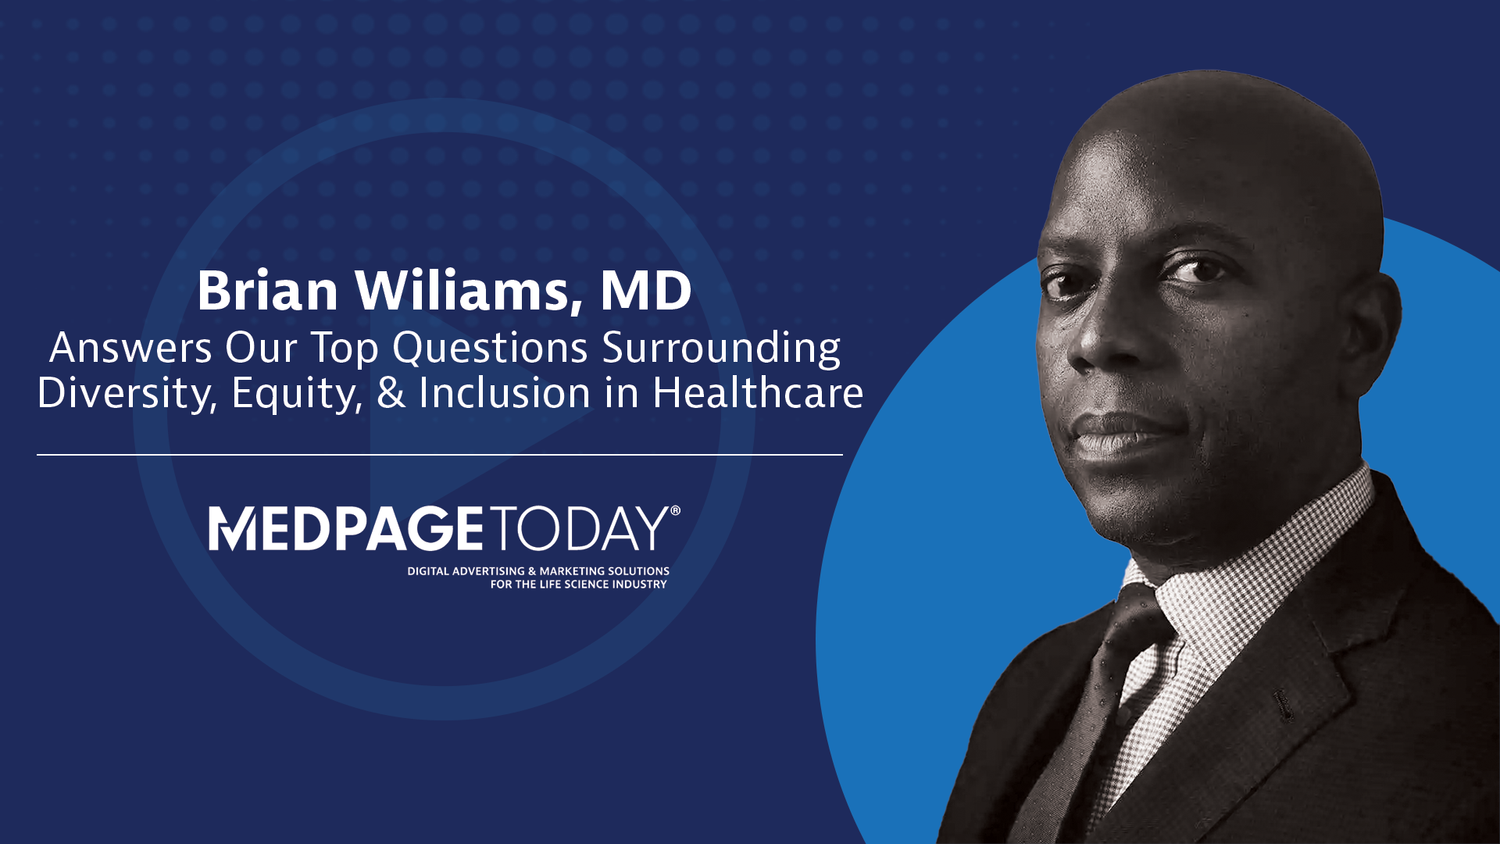 Nationally Recognized Leader in Health Equity, Brian Williams, MD ...